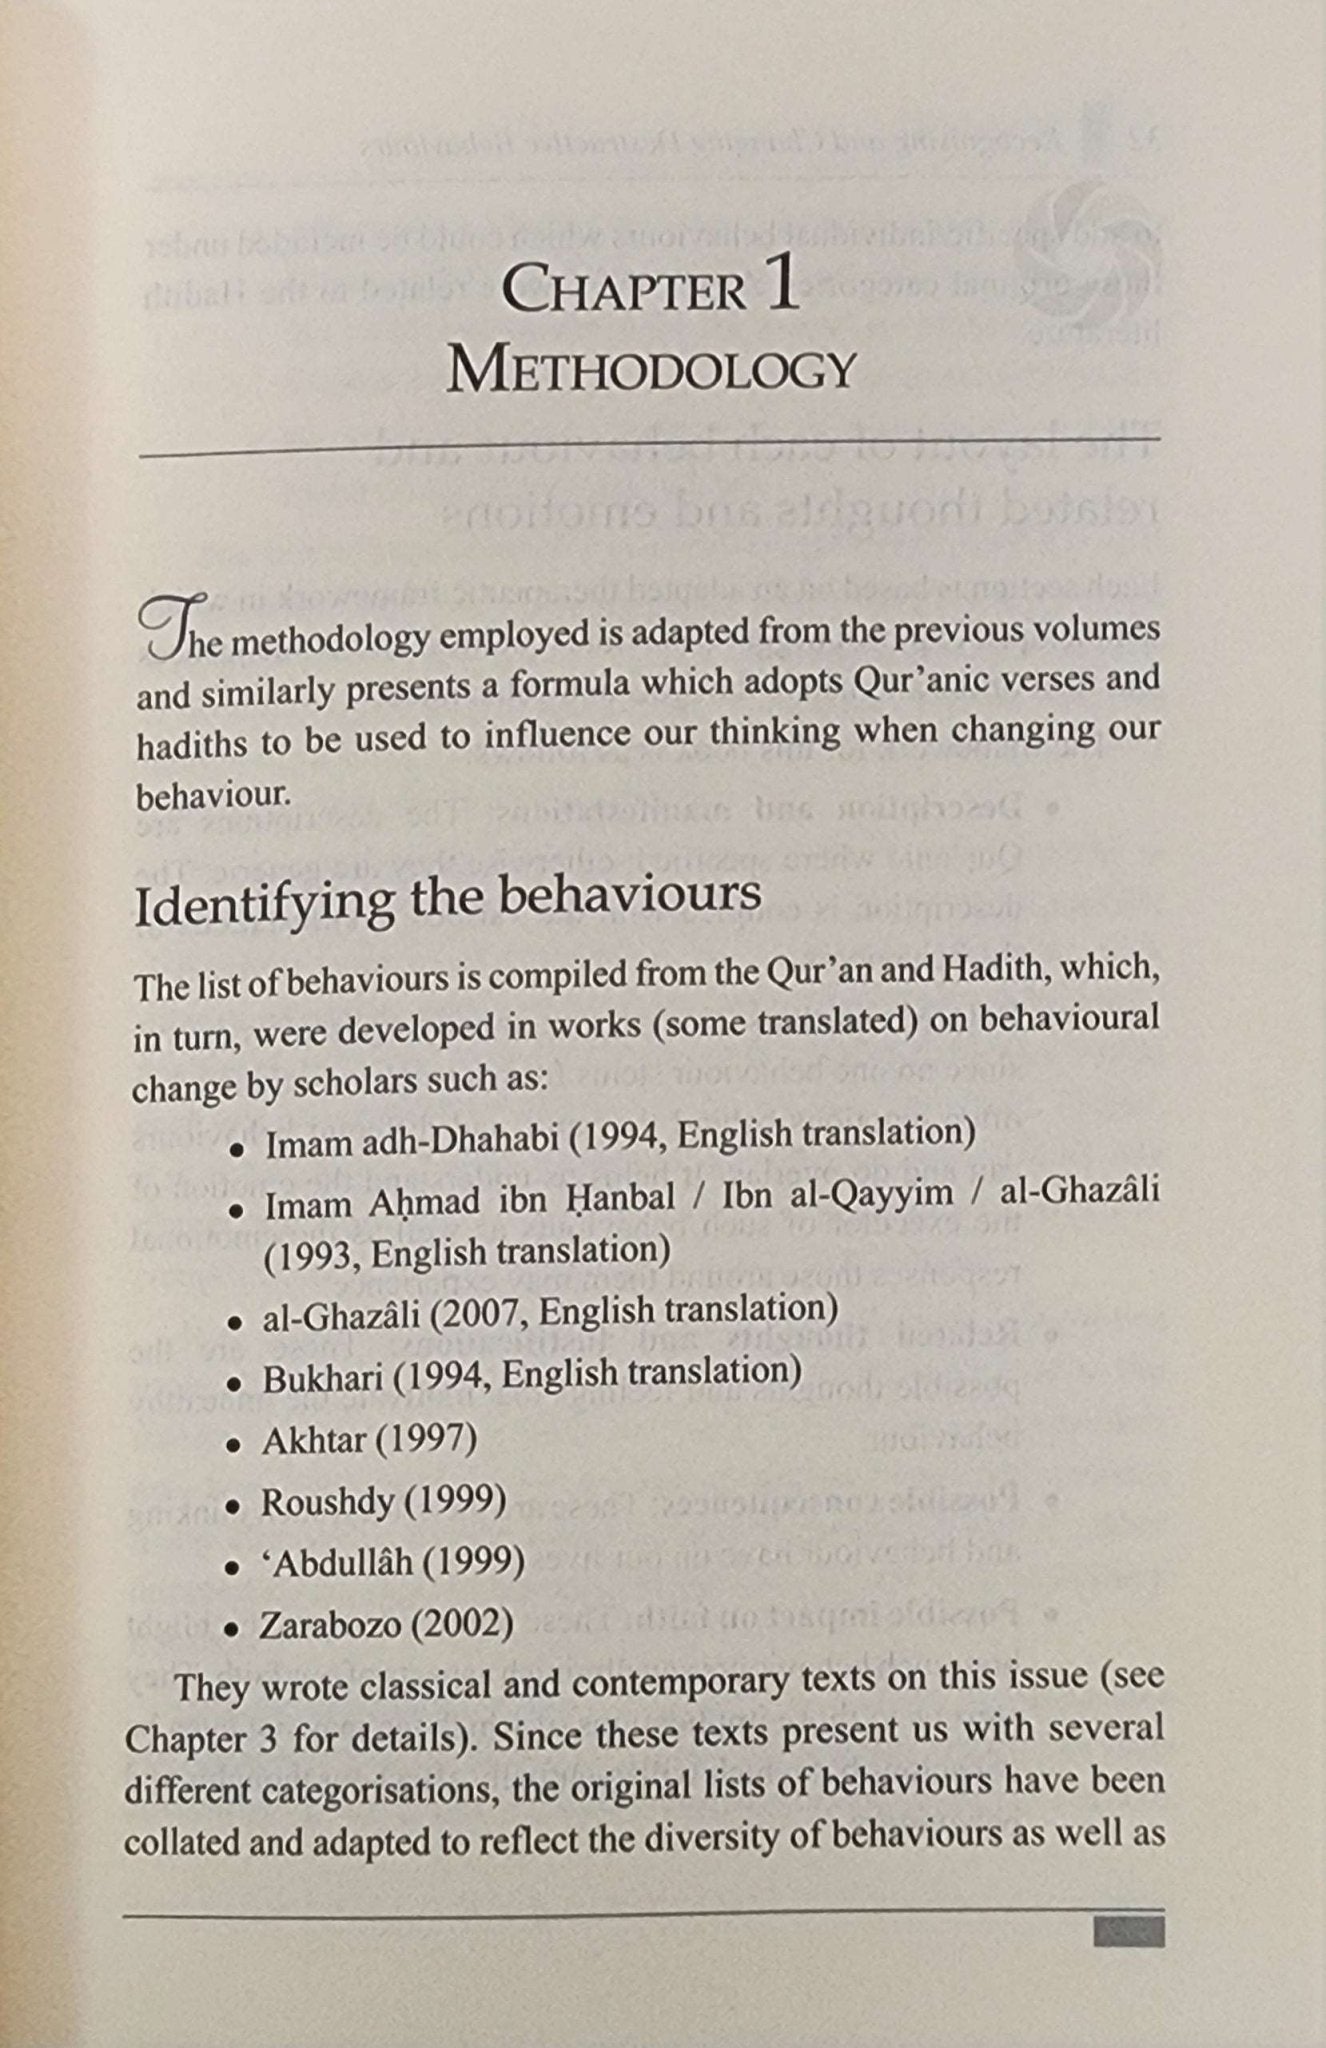 Recognising and Changing Destructive Behaviours | Therapy From The Qur'an and Sunnah Book 3 - The Islamic Book Cafe LLC